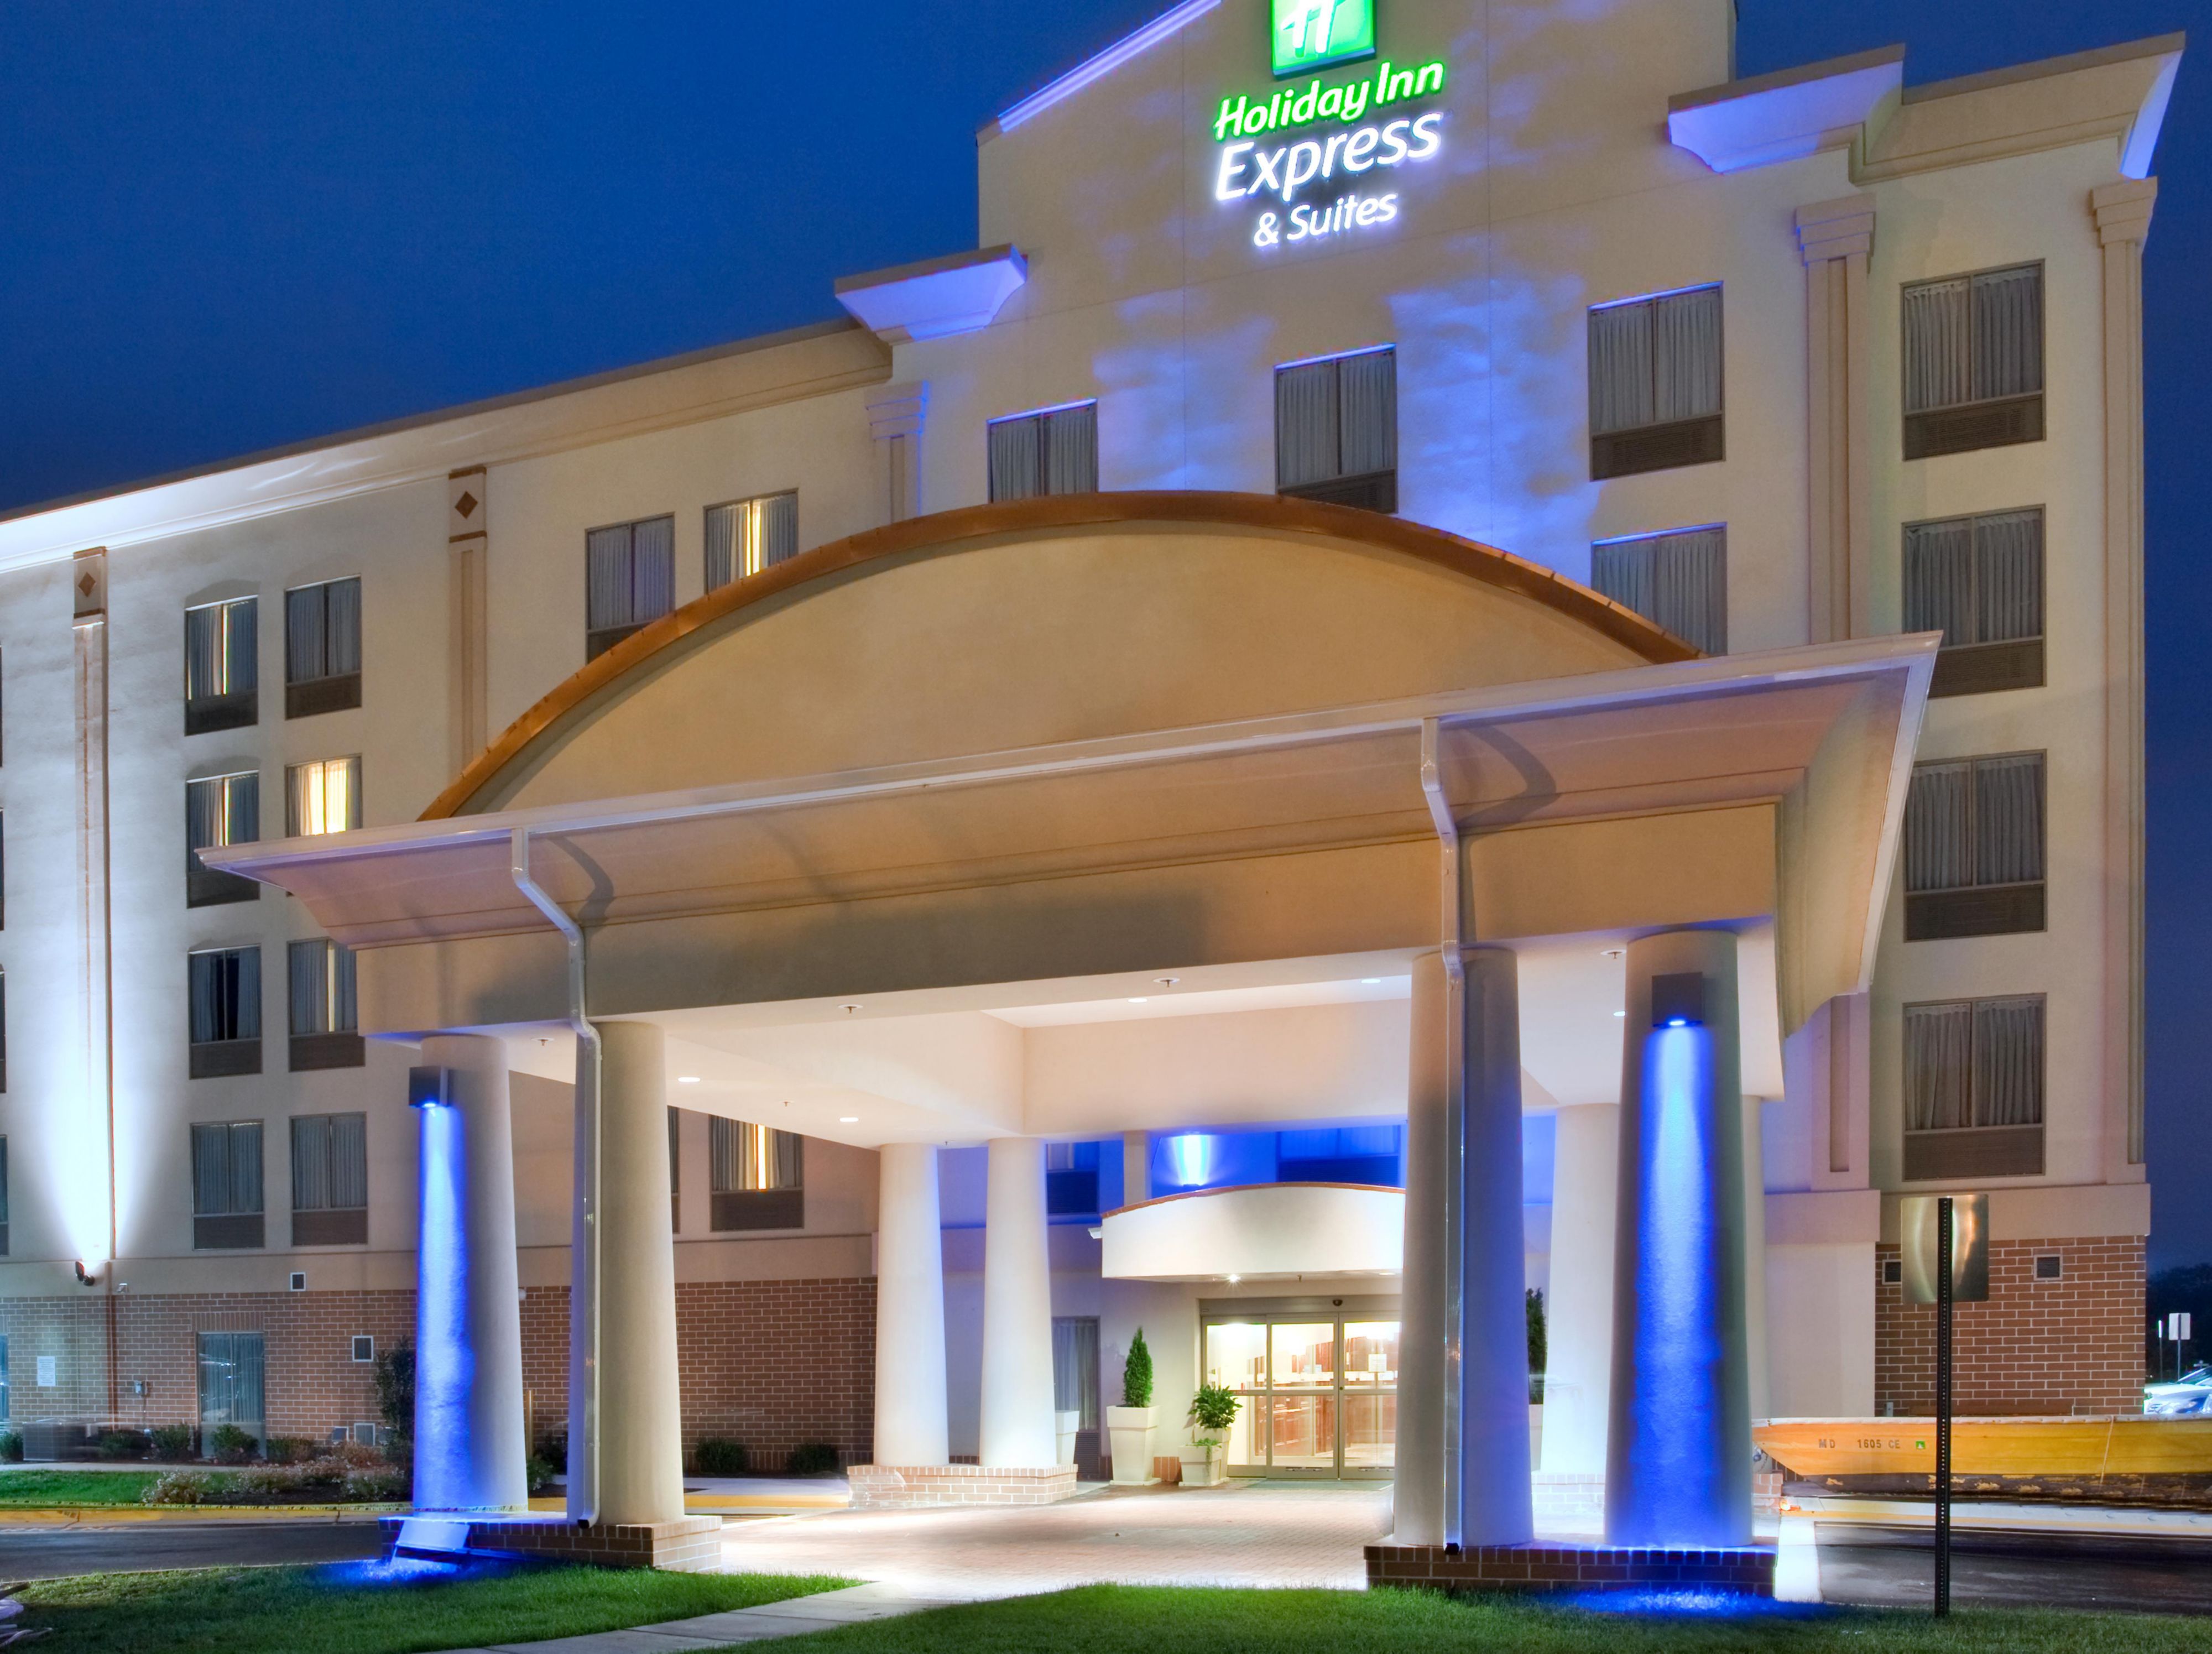 Holiday Inn Express And Suites Fredericksburg 4263405046 4x3